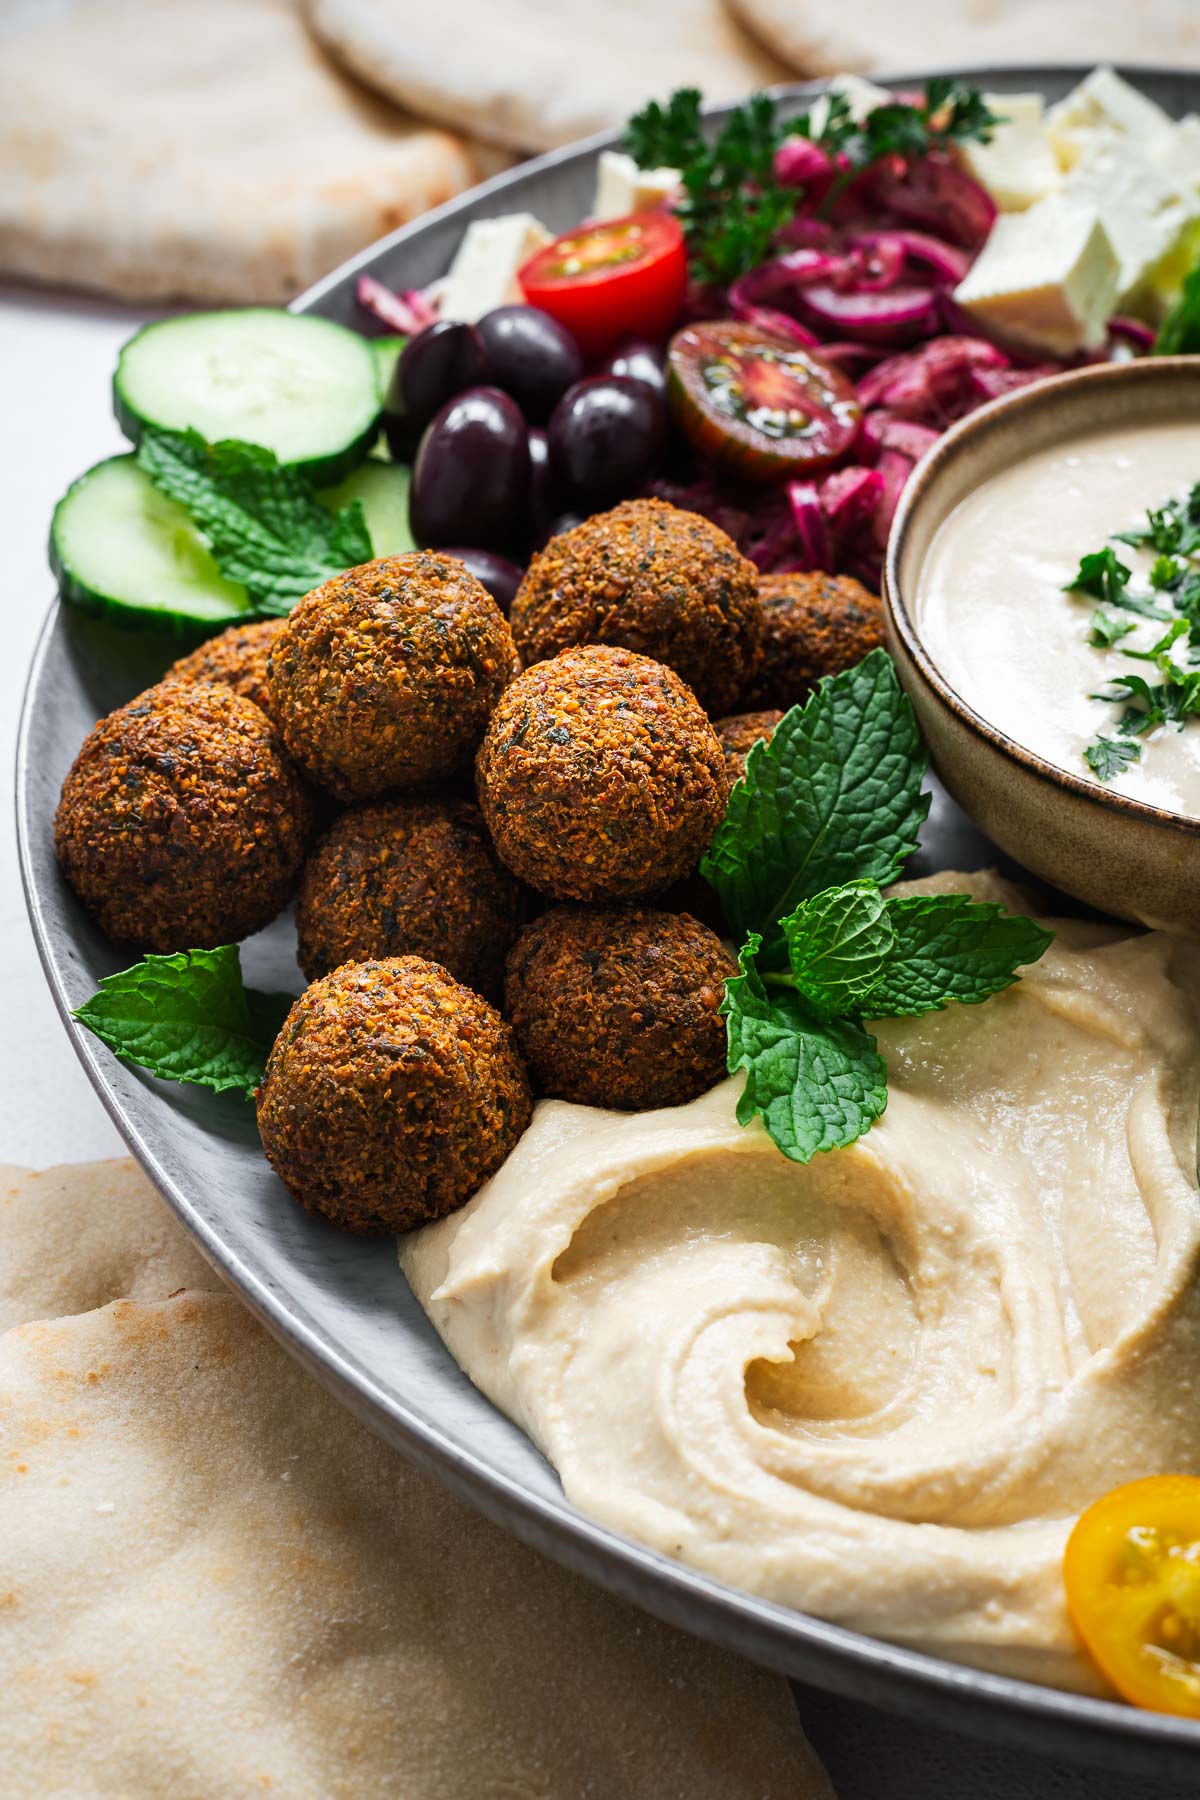 What to Serve With Falafel (the Best Sides & Sauces)